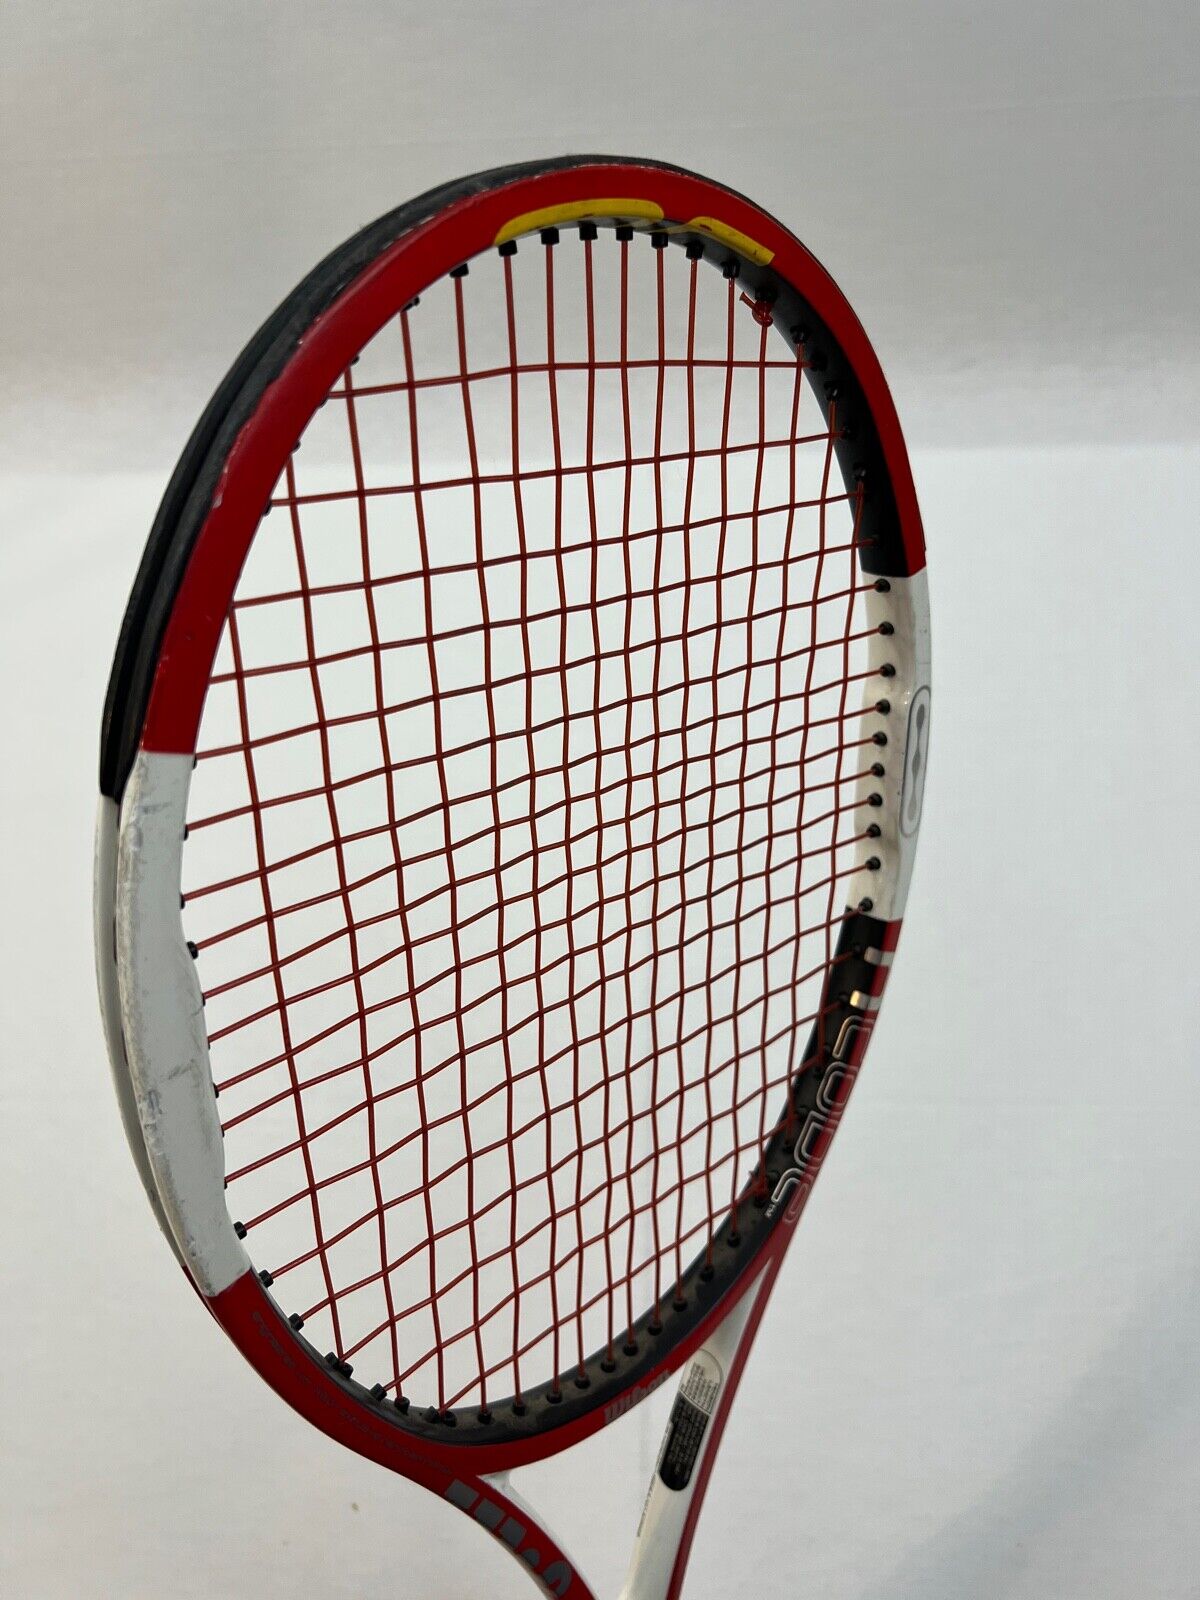 Wilson N Code Six One Tour 90 4 1/2, Good Condition Roger Federer